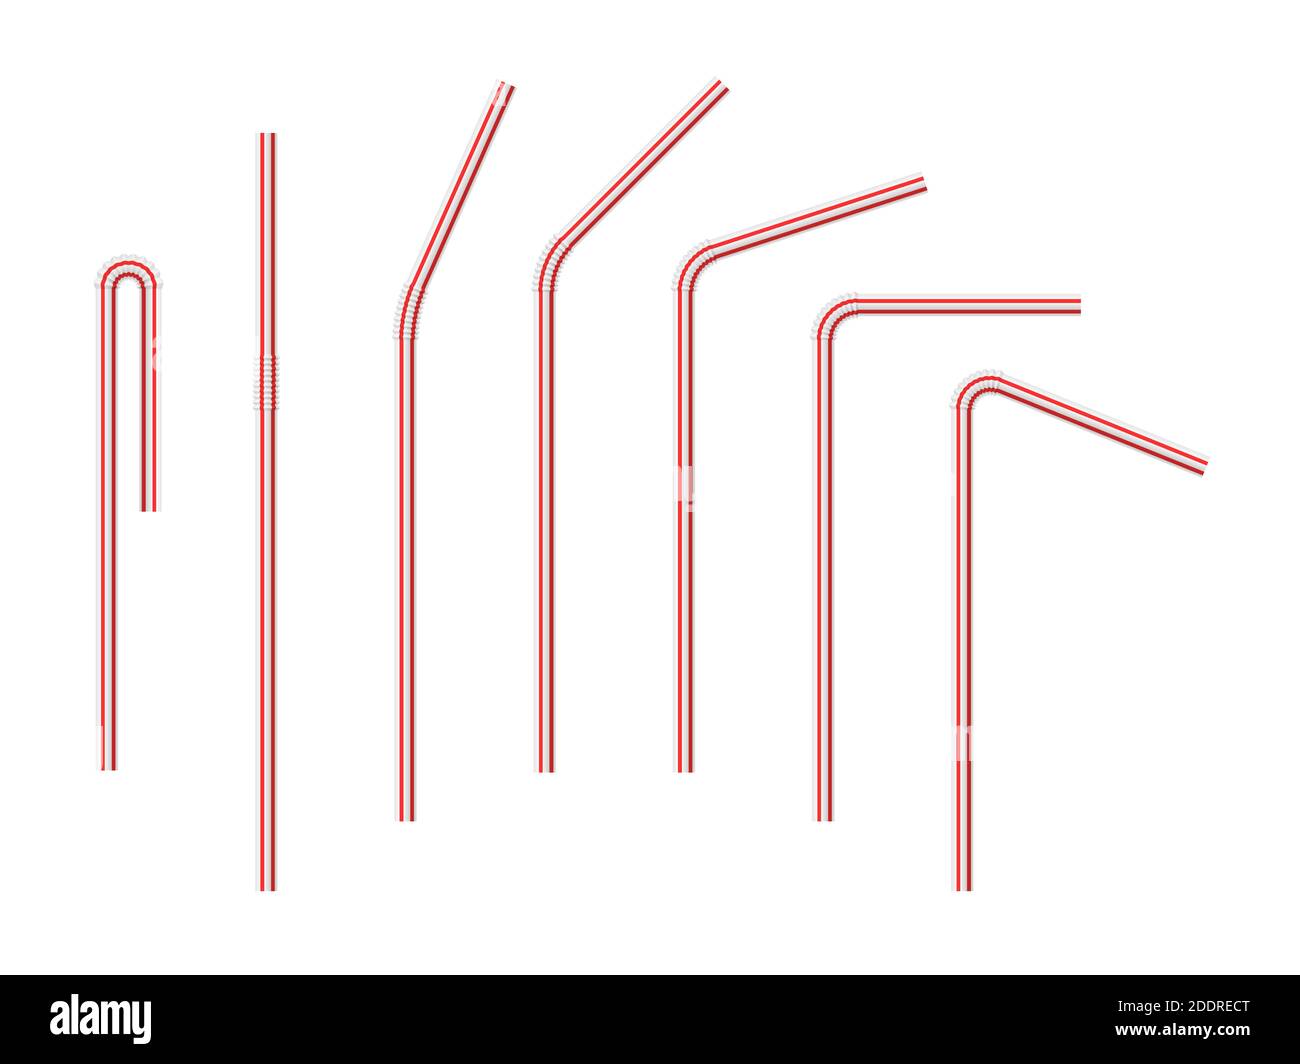 Vector realistic drinking straws striped for milk drinks, cocktails or alcohol. Set of white-red drinking straws isolated with various bends. 3D templ Stock Vector